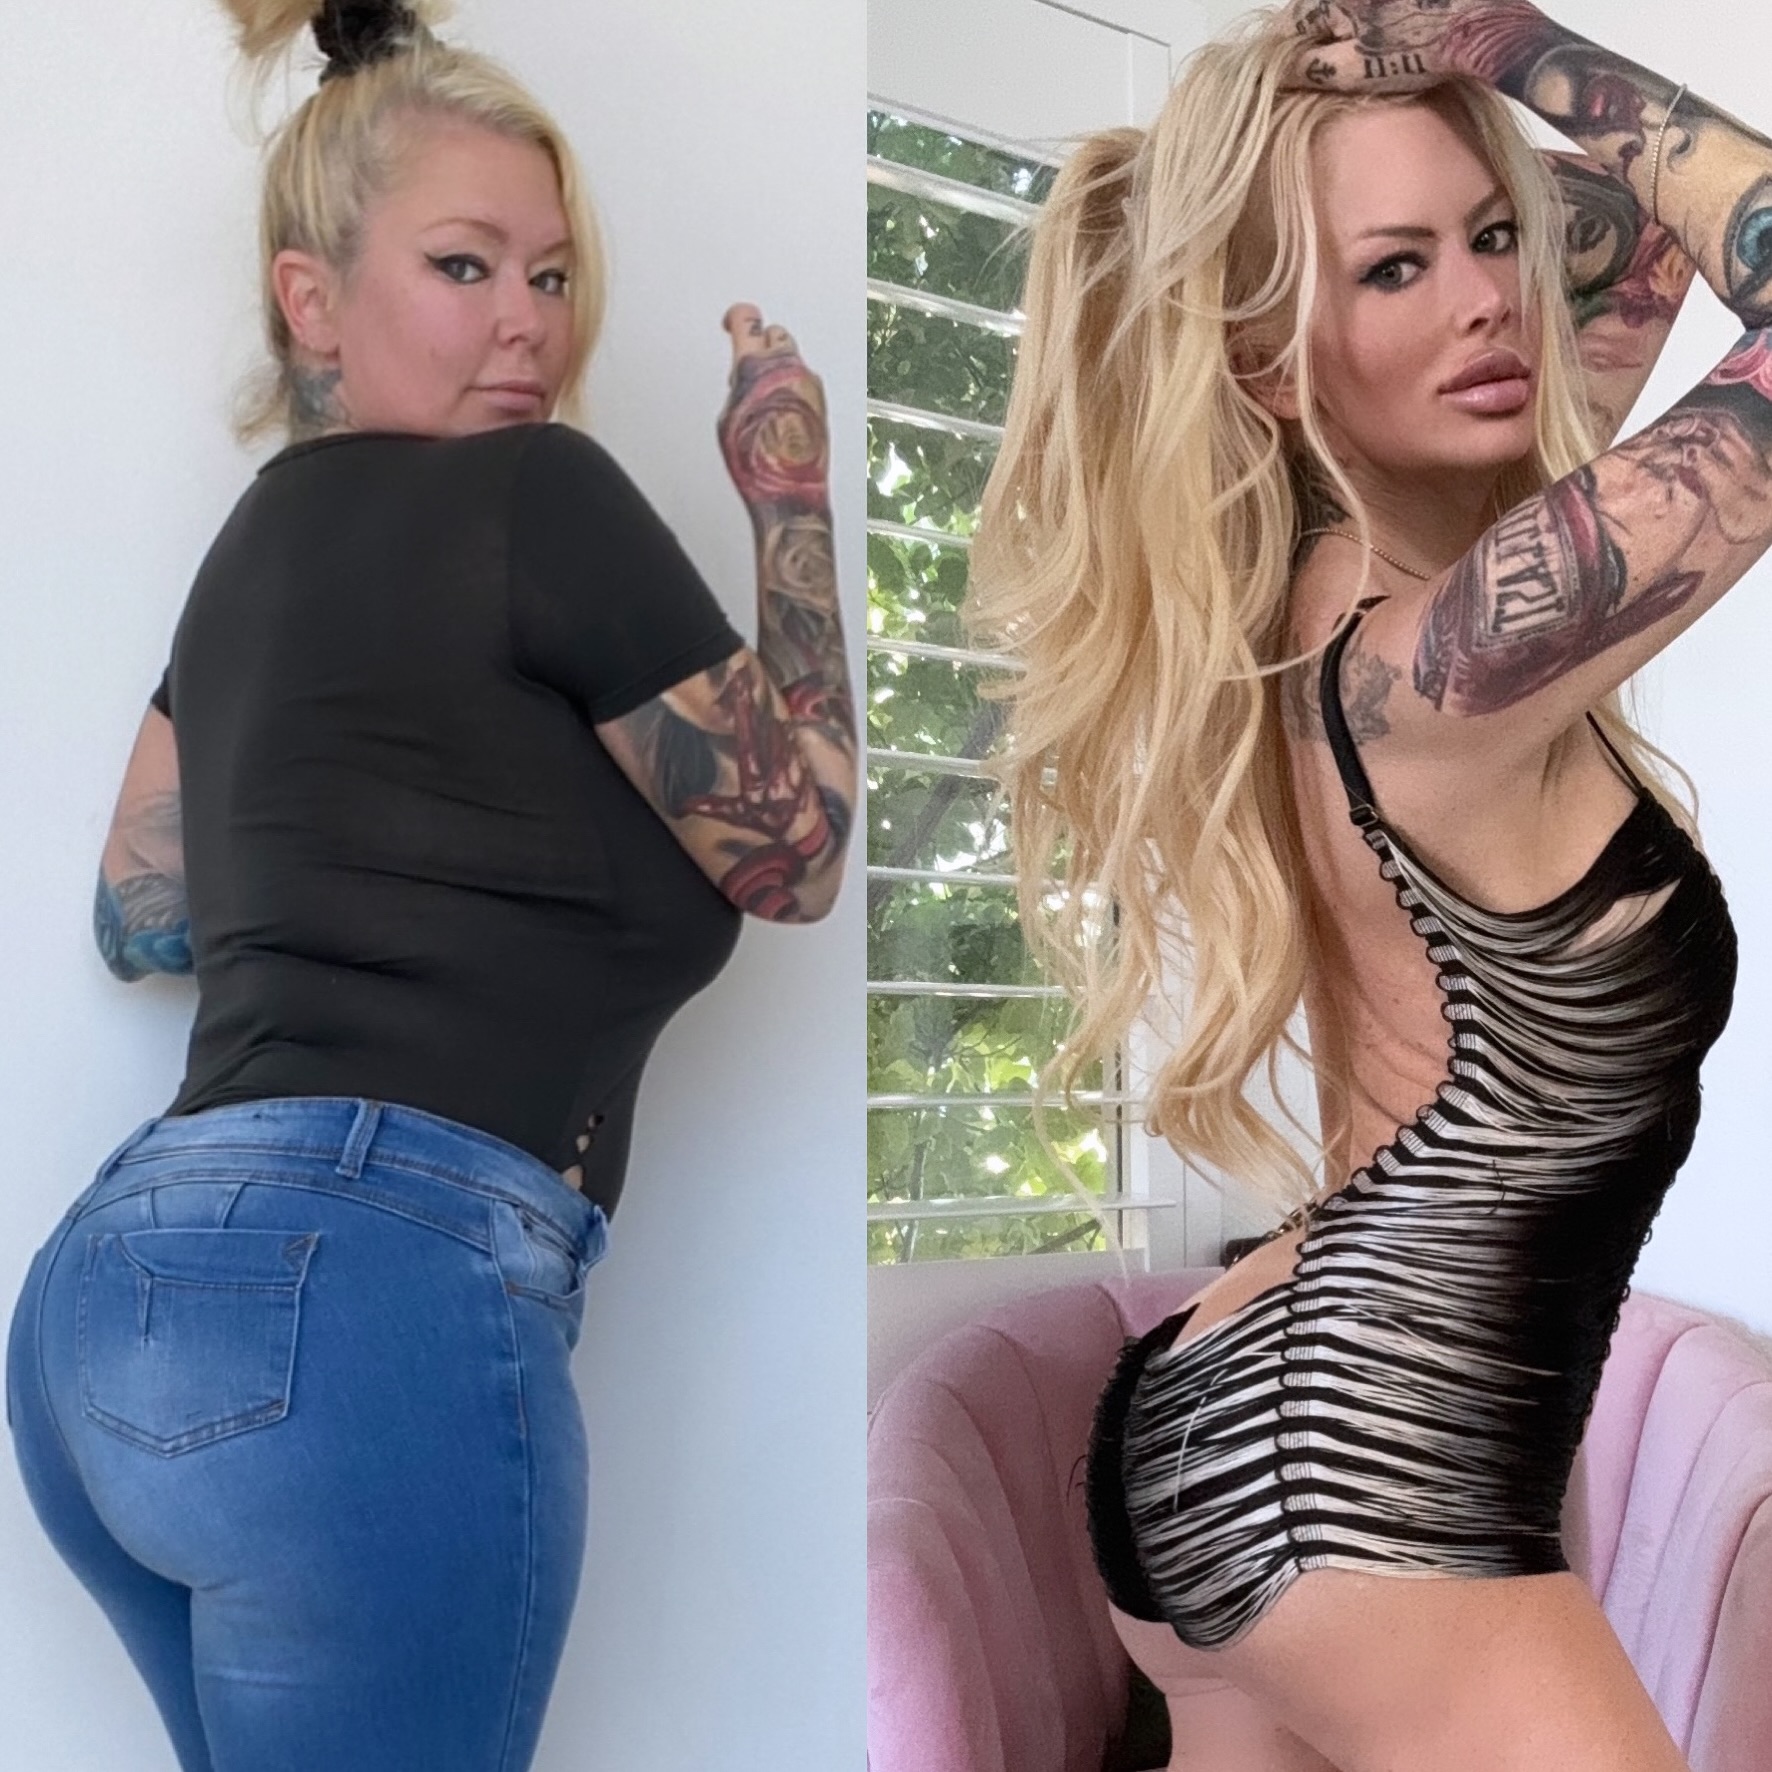 She has been posting before-and-after photos of her transformation